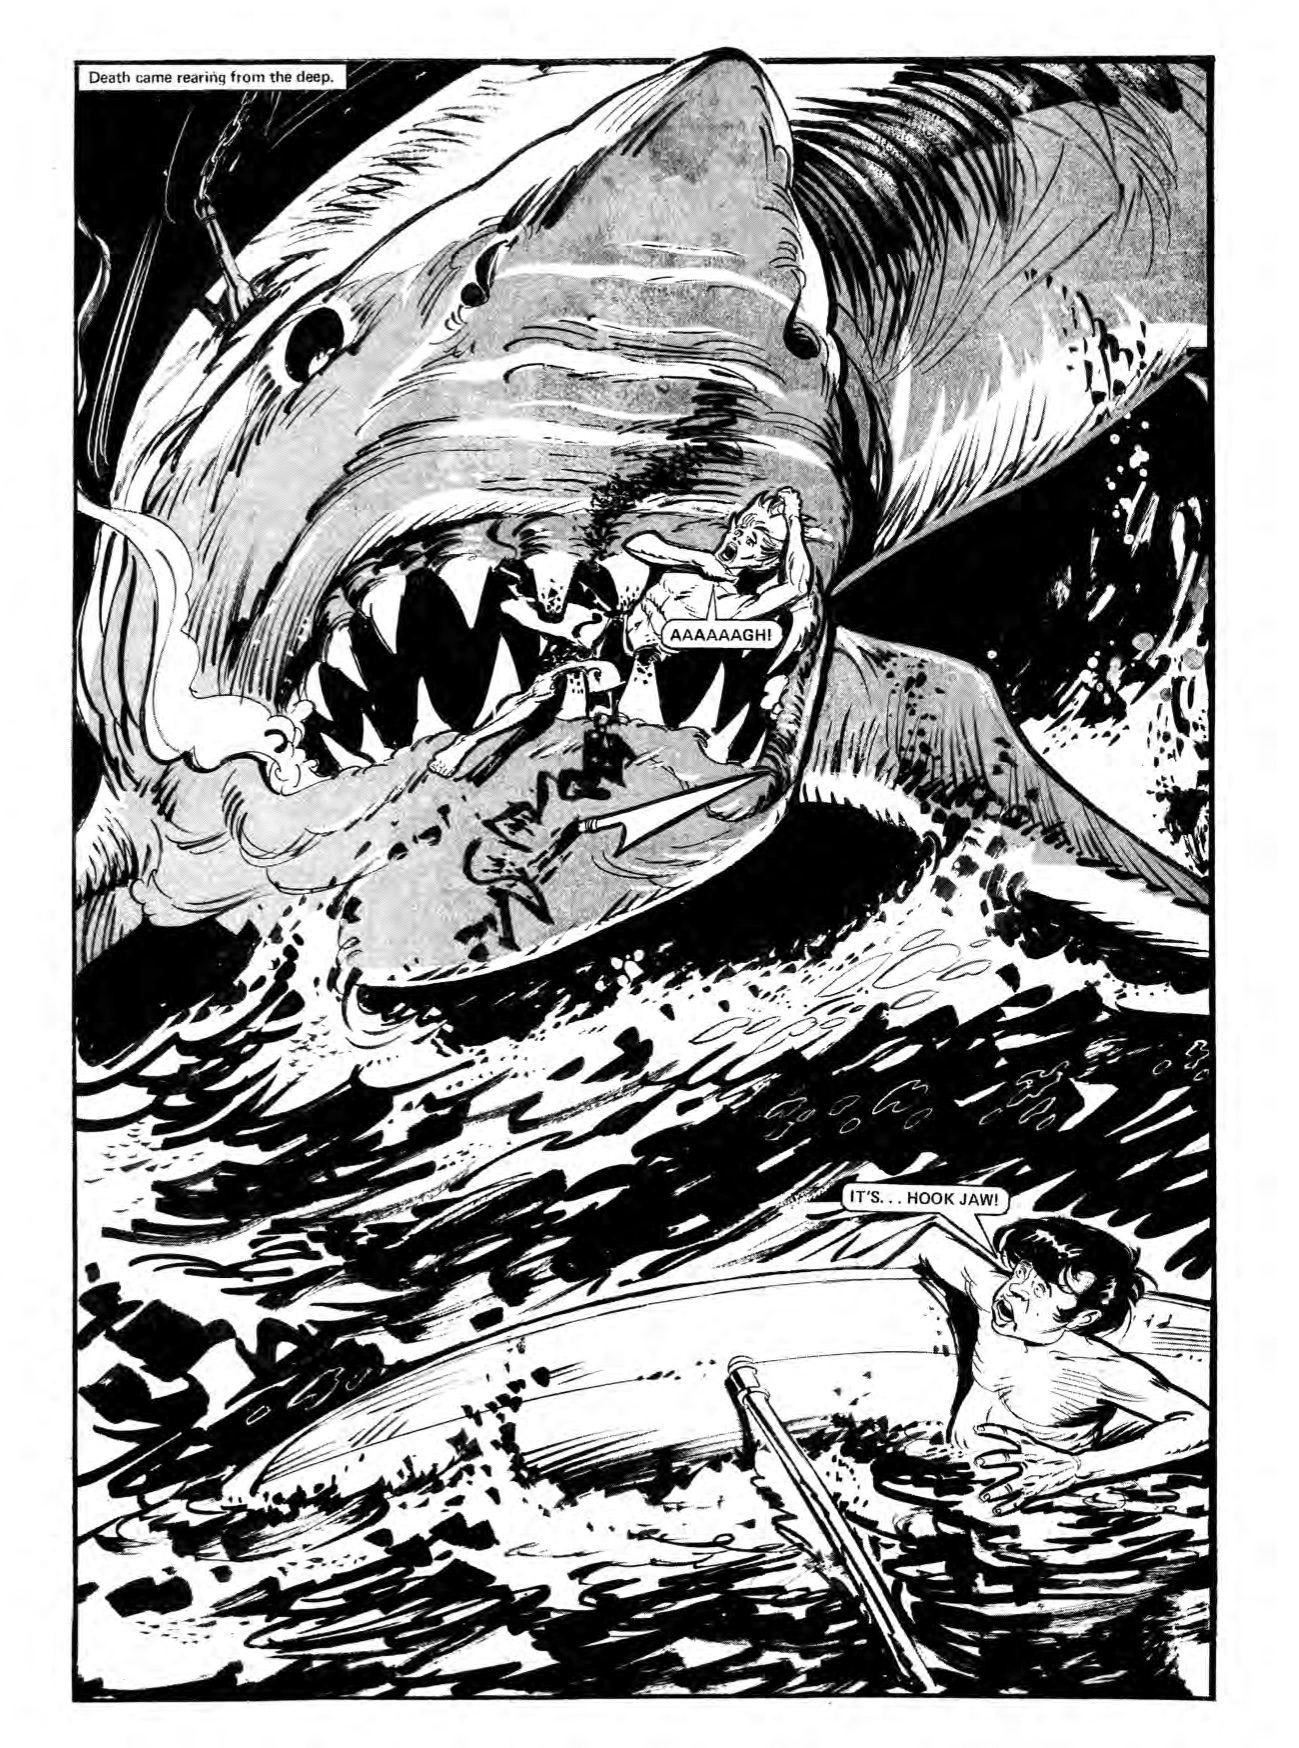 Hook_Jaw_Archive_Page 2